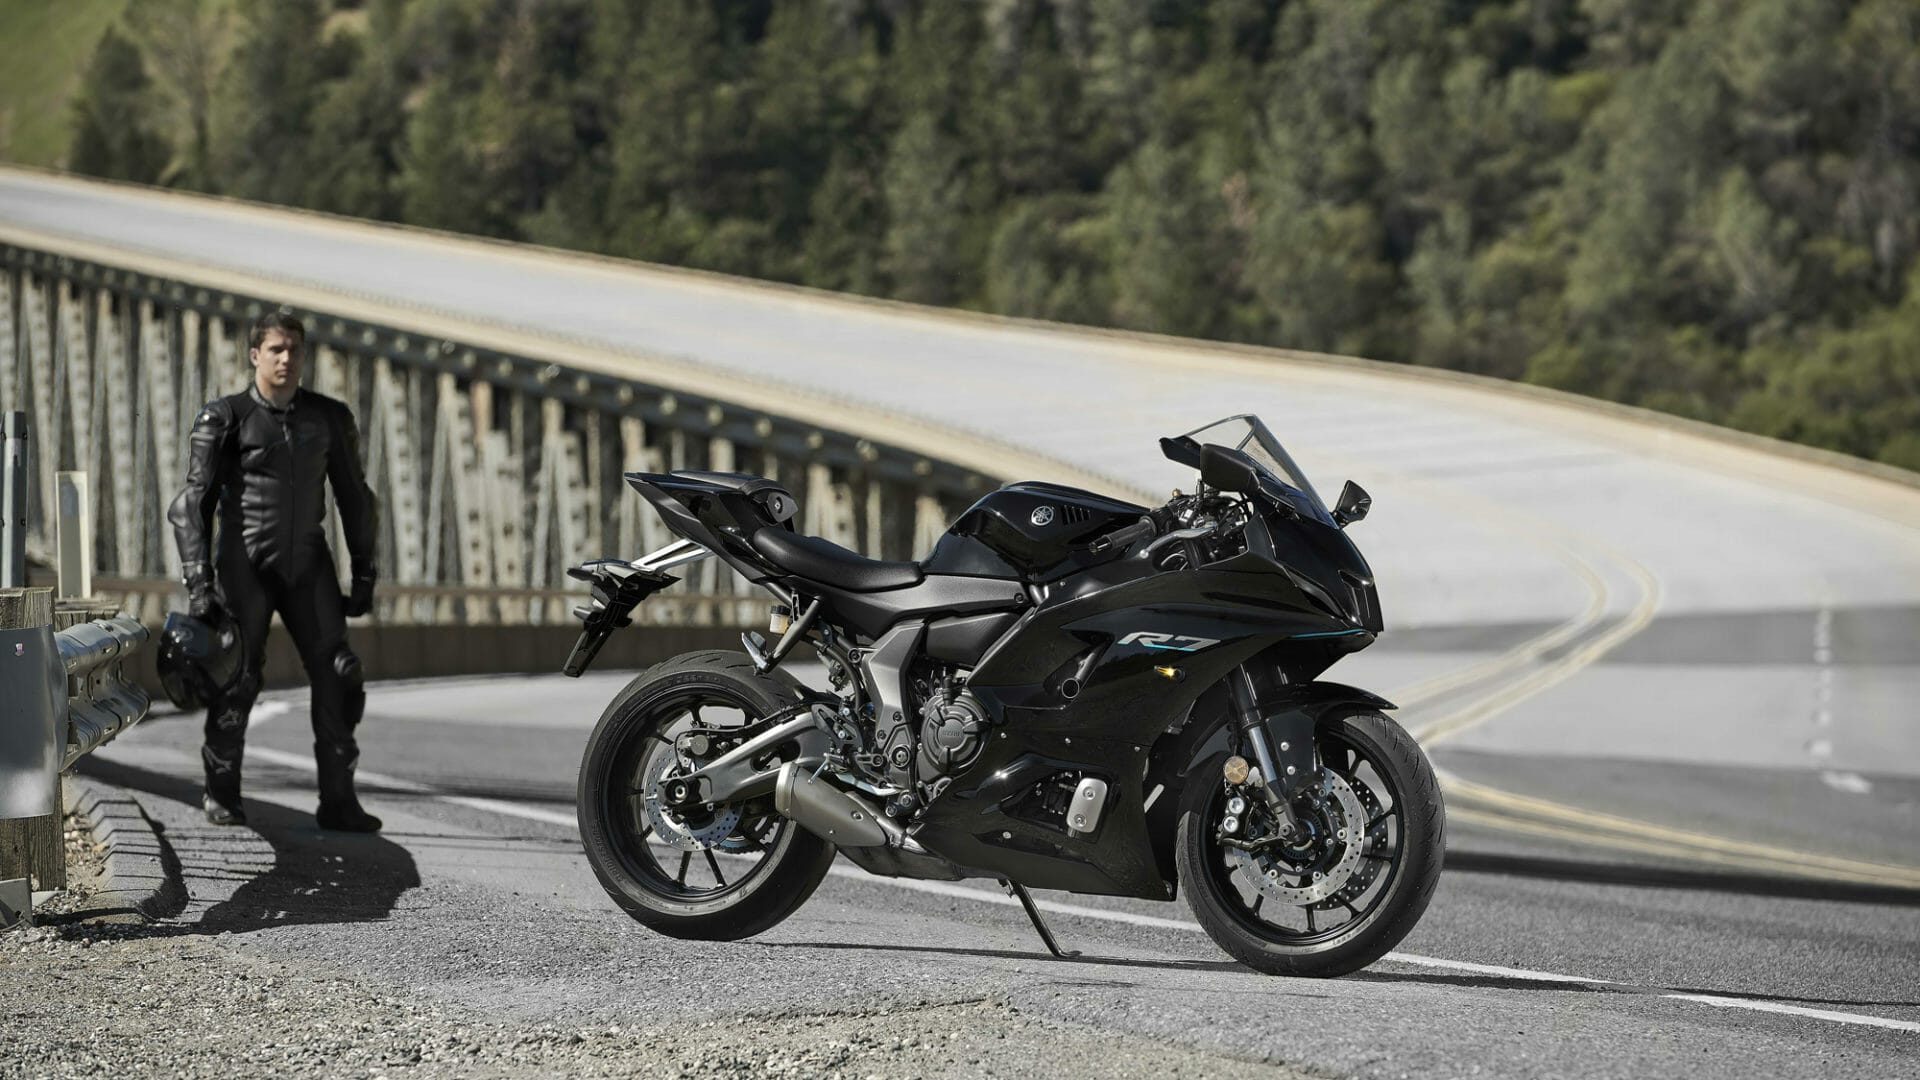 Yamaha YZF-R7 photos leaked
- also in the MOTORCYCLES.NEWS APP